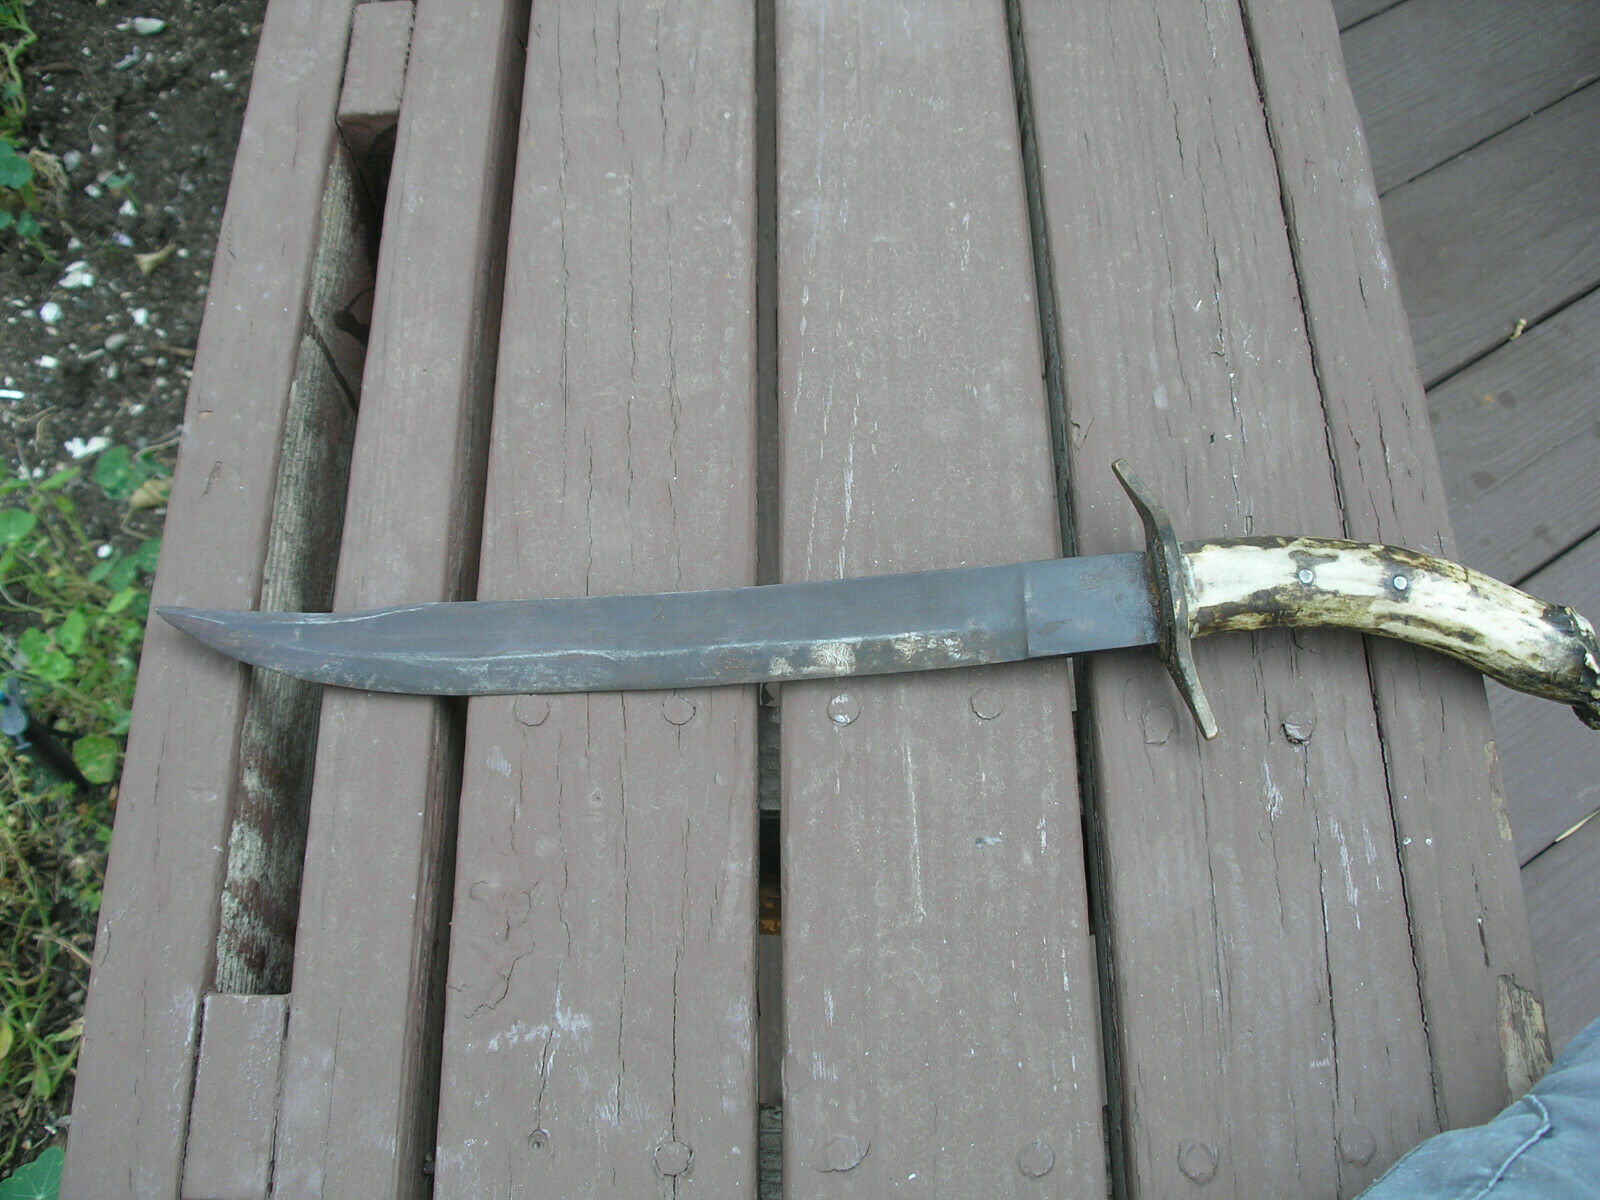 Nice Civil War Bowie Knife Made From Sword Blade